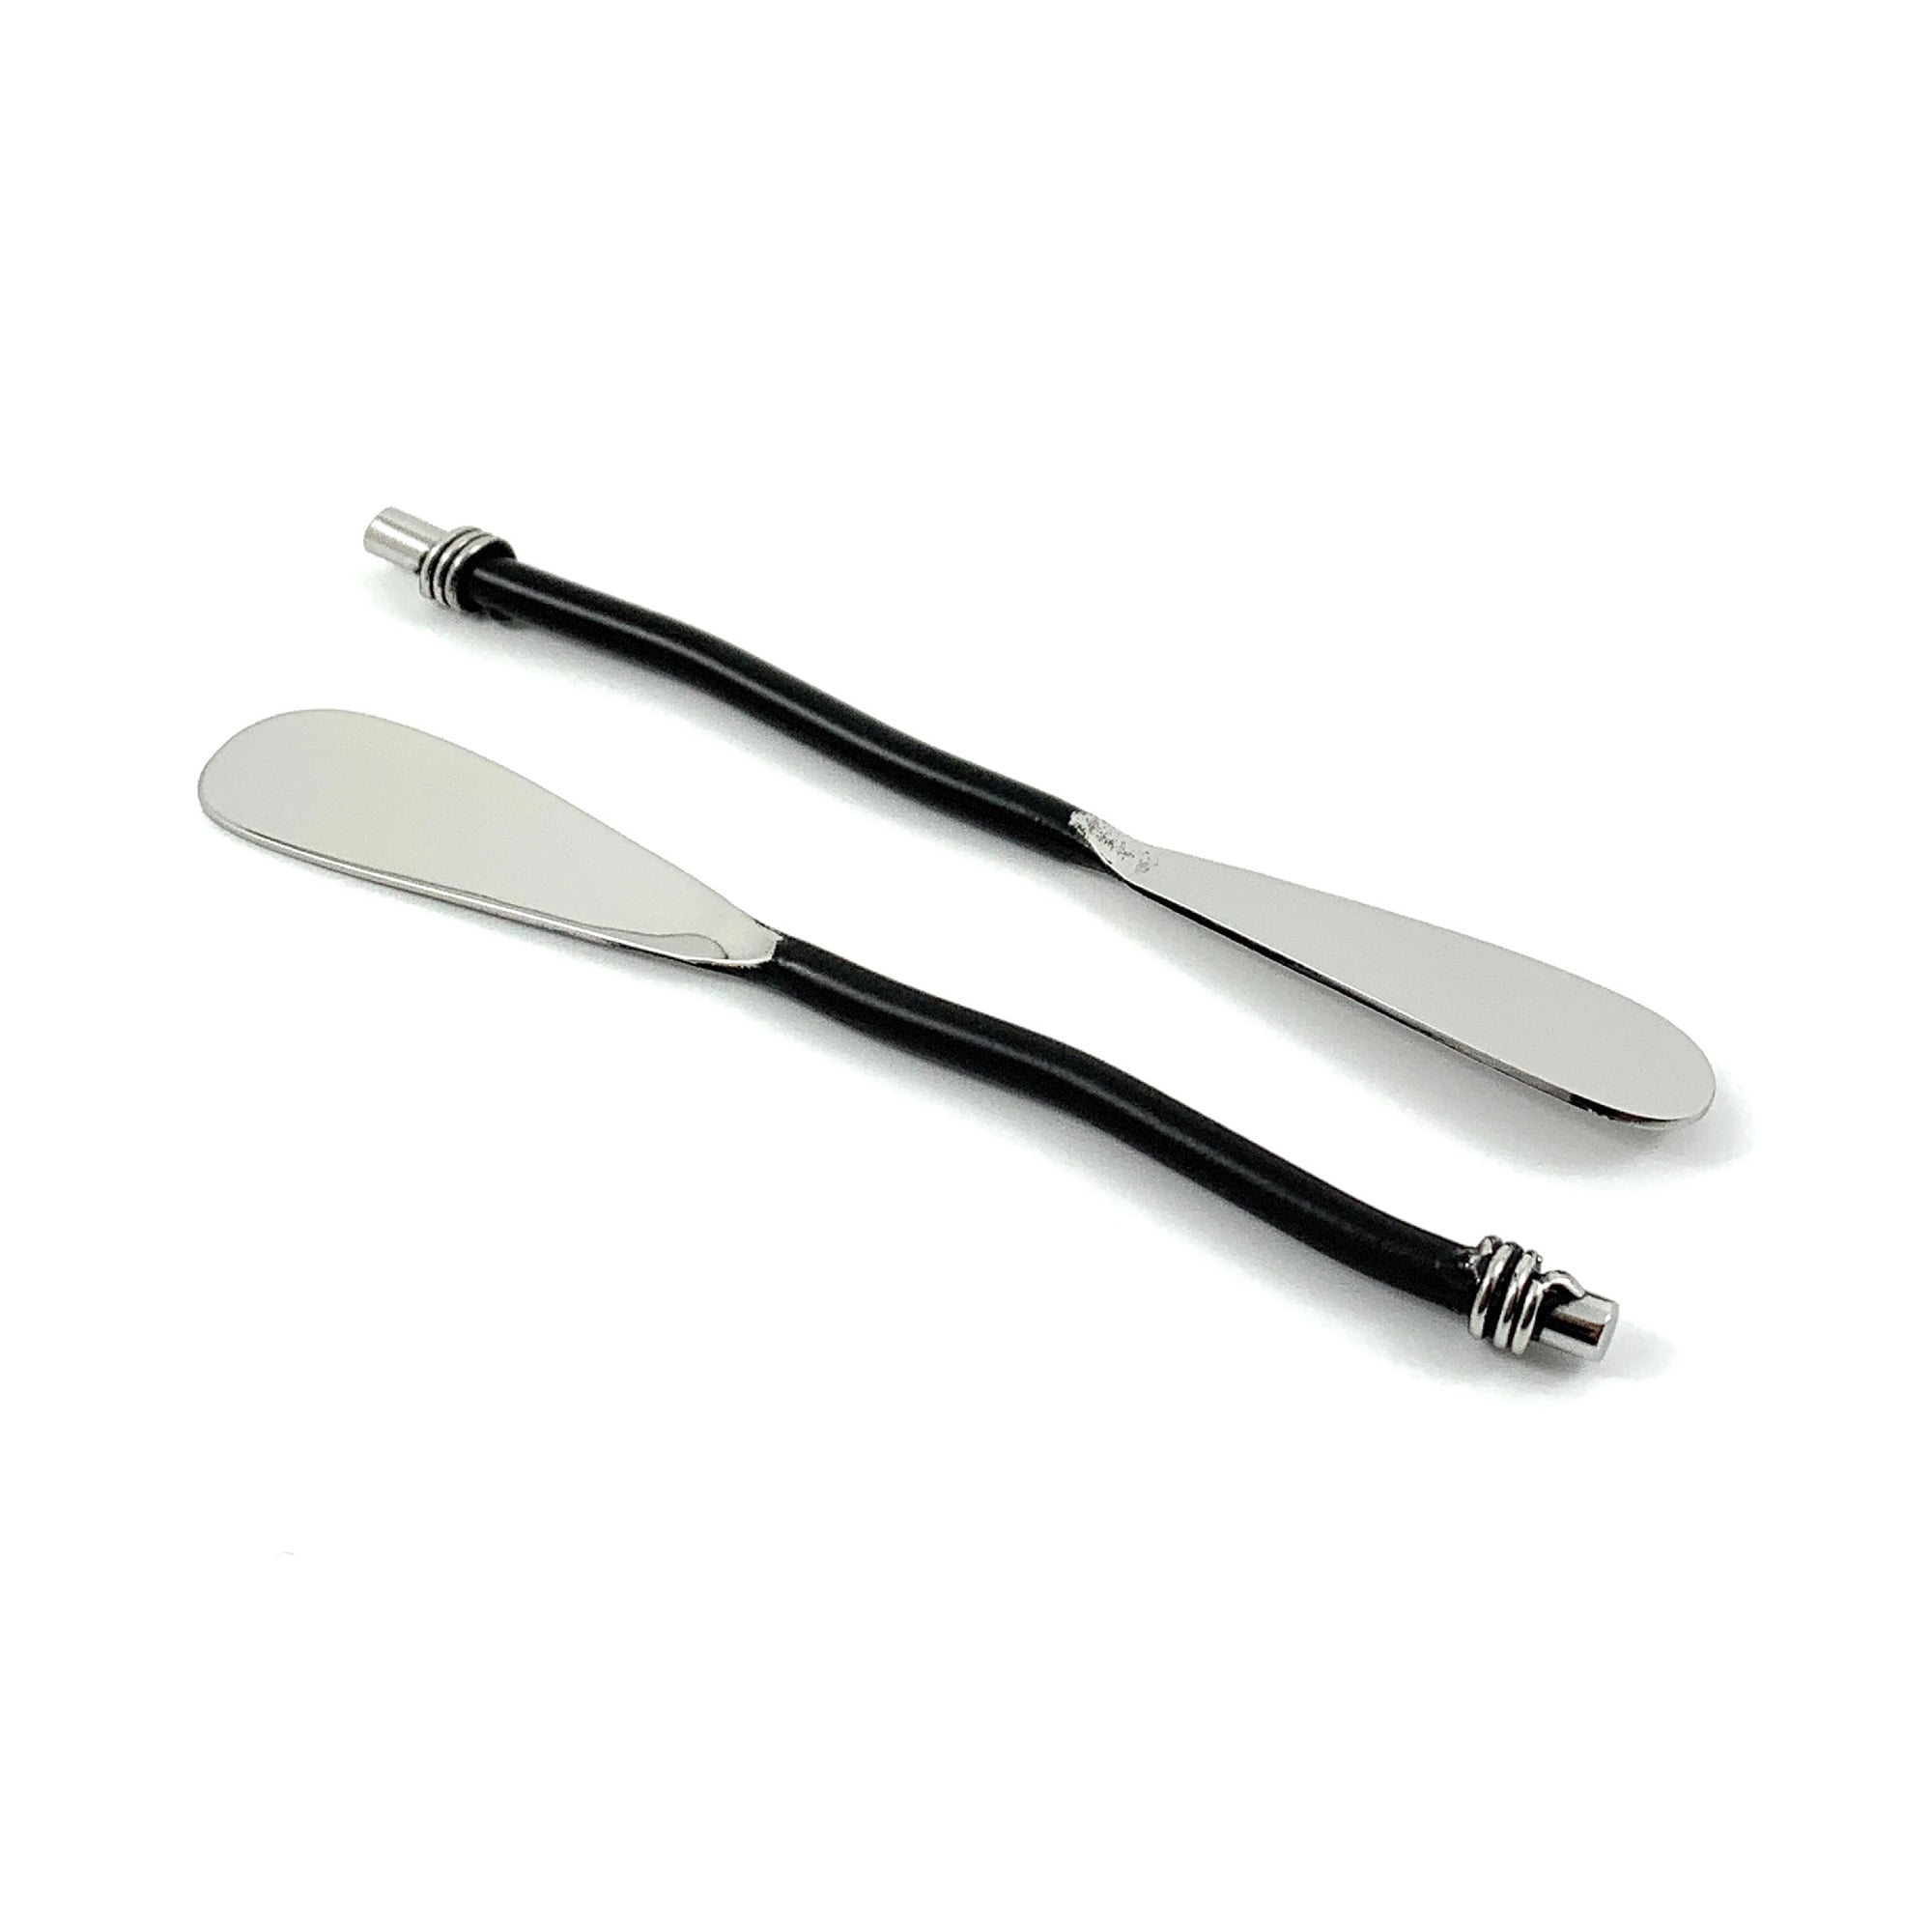 Preferred 2 Piece Stainless Steel Carving Set